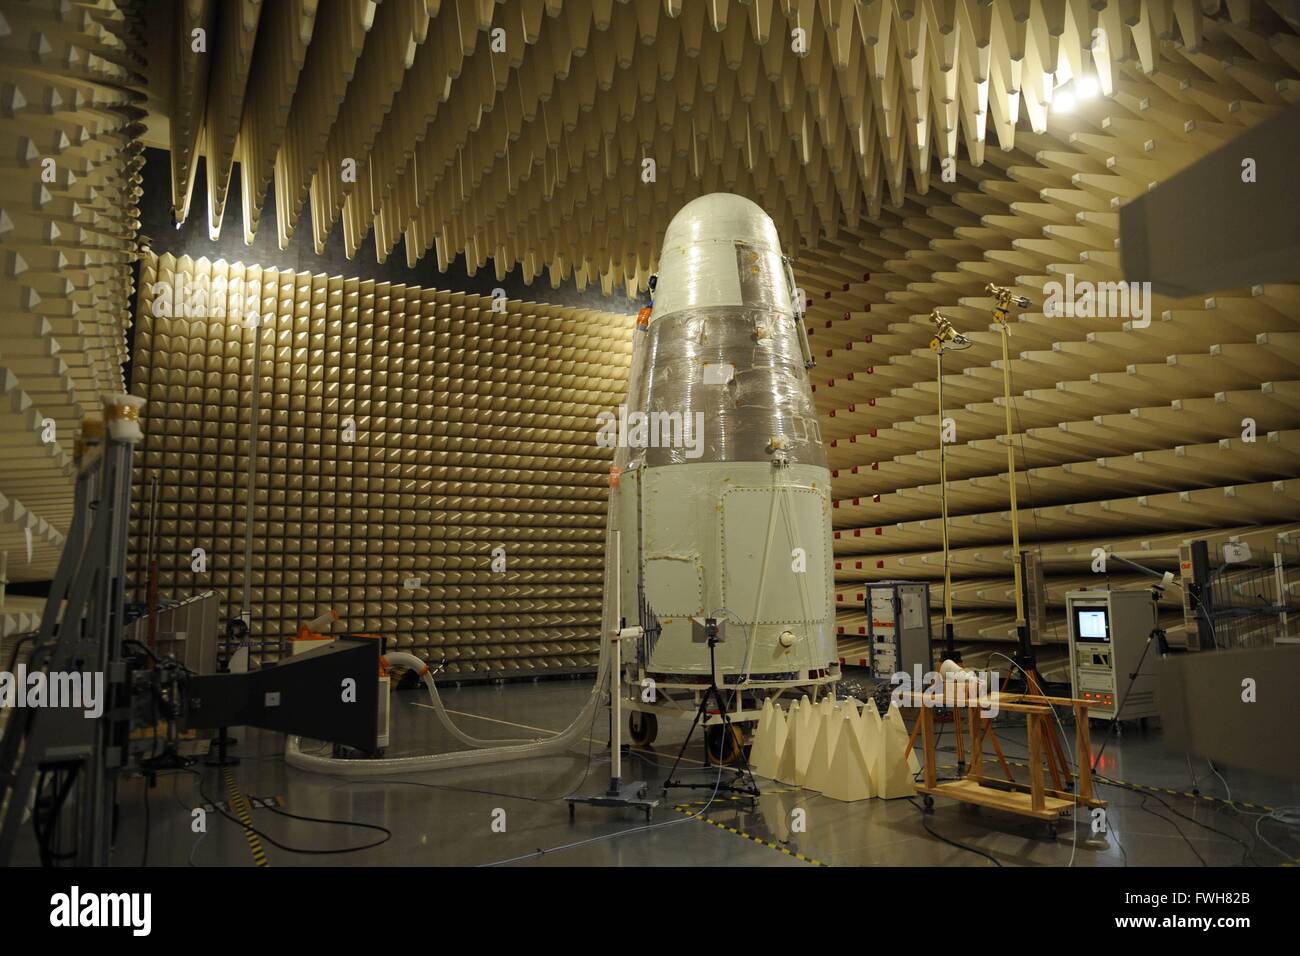 Jiuquan. 8th Sep, 2015. Photo provided by the Chinese Academy of Sciences, taken on Sept. 8, 2015 shows the SJ-10 Satellite under experiment. China put into space a retrievable scientific research satellite SJ-10 in the early hours of Wednesday in a fresh bid to aid scientists back on Earth in studying microgravity and space life science. © Chinese Academy of Sciences/Xinhua/Alamy Live News Stock Photo